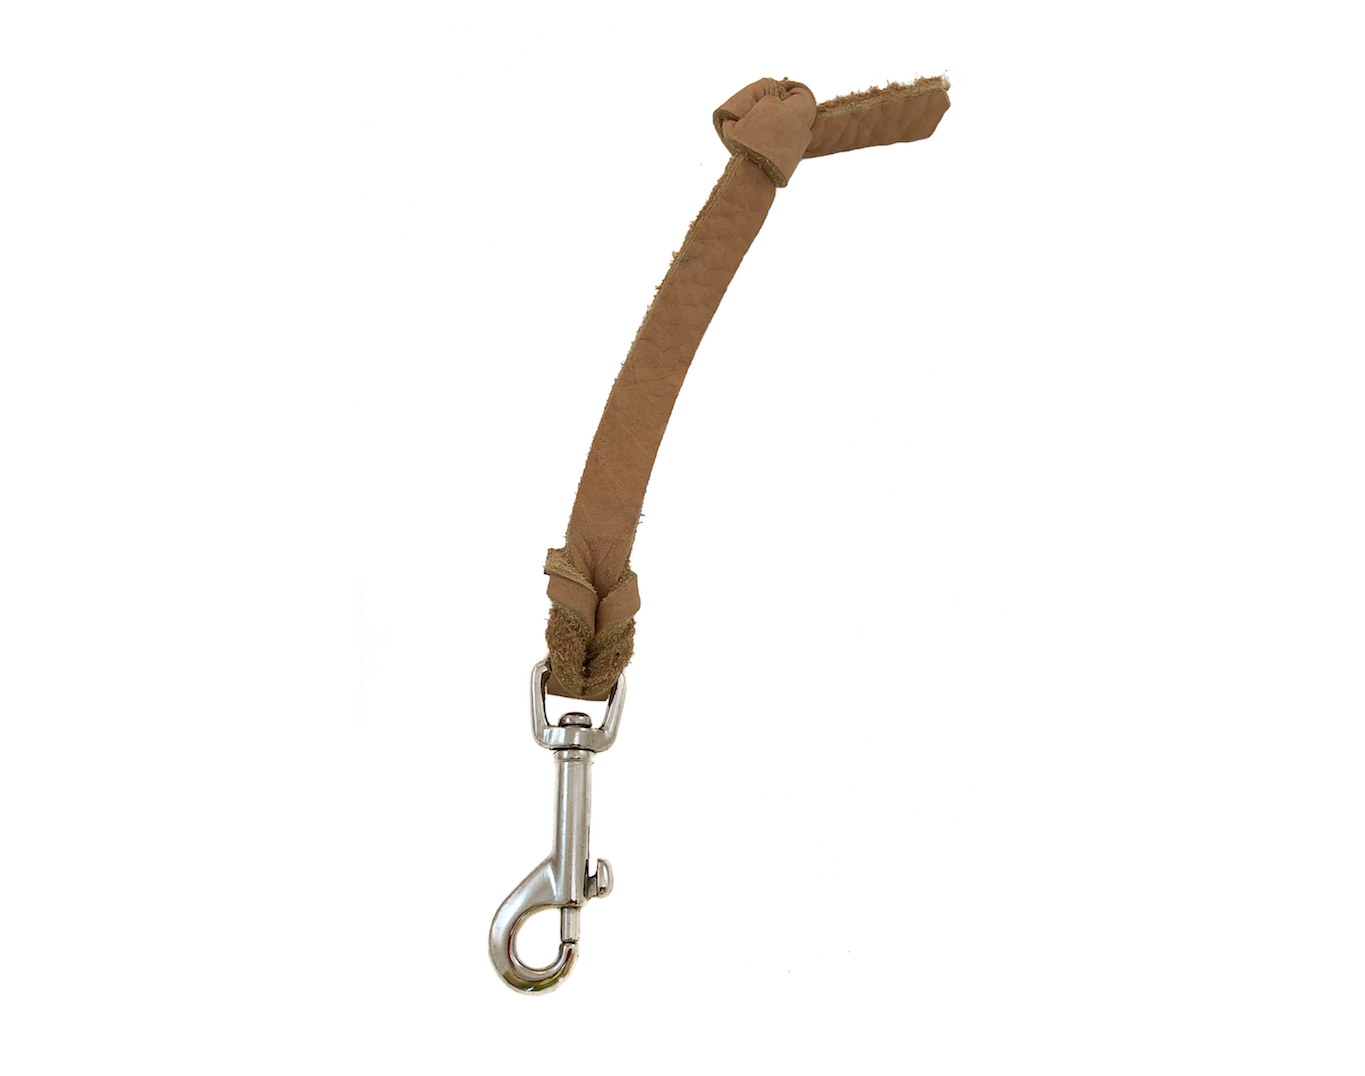  White Pine ½” Bullhide Pull Tab with Knot in Chestnut. 